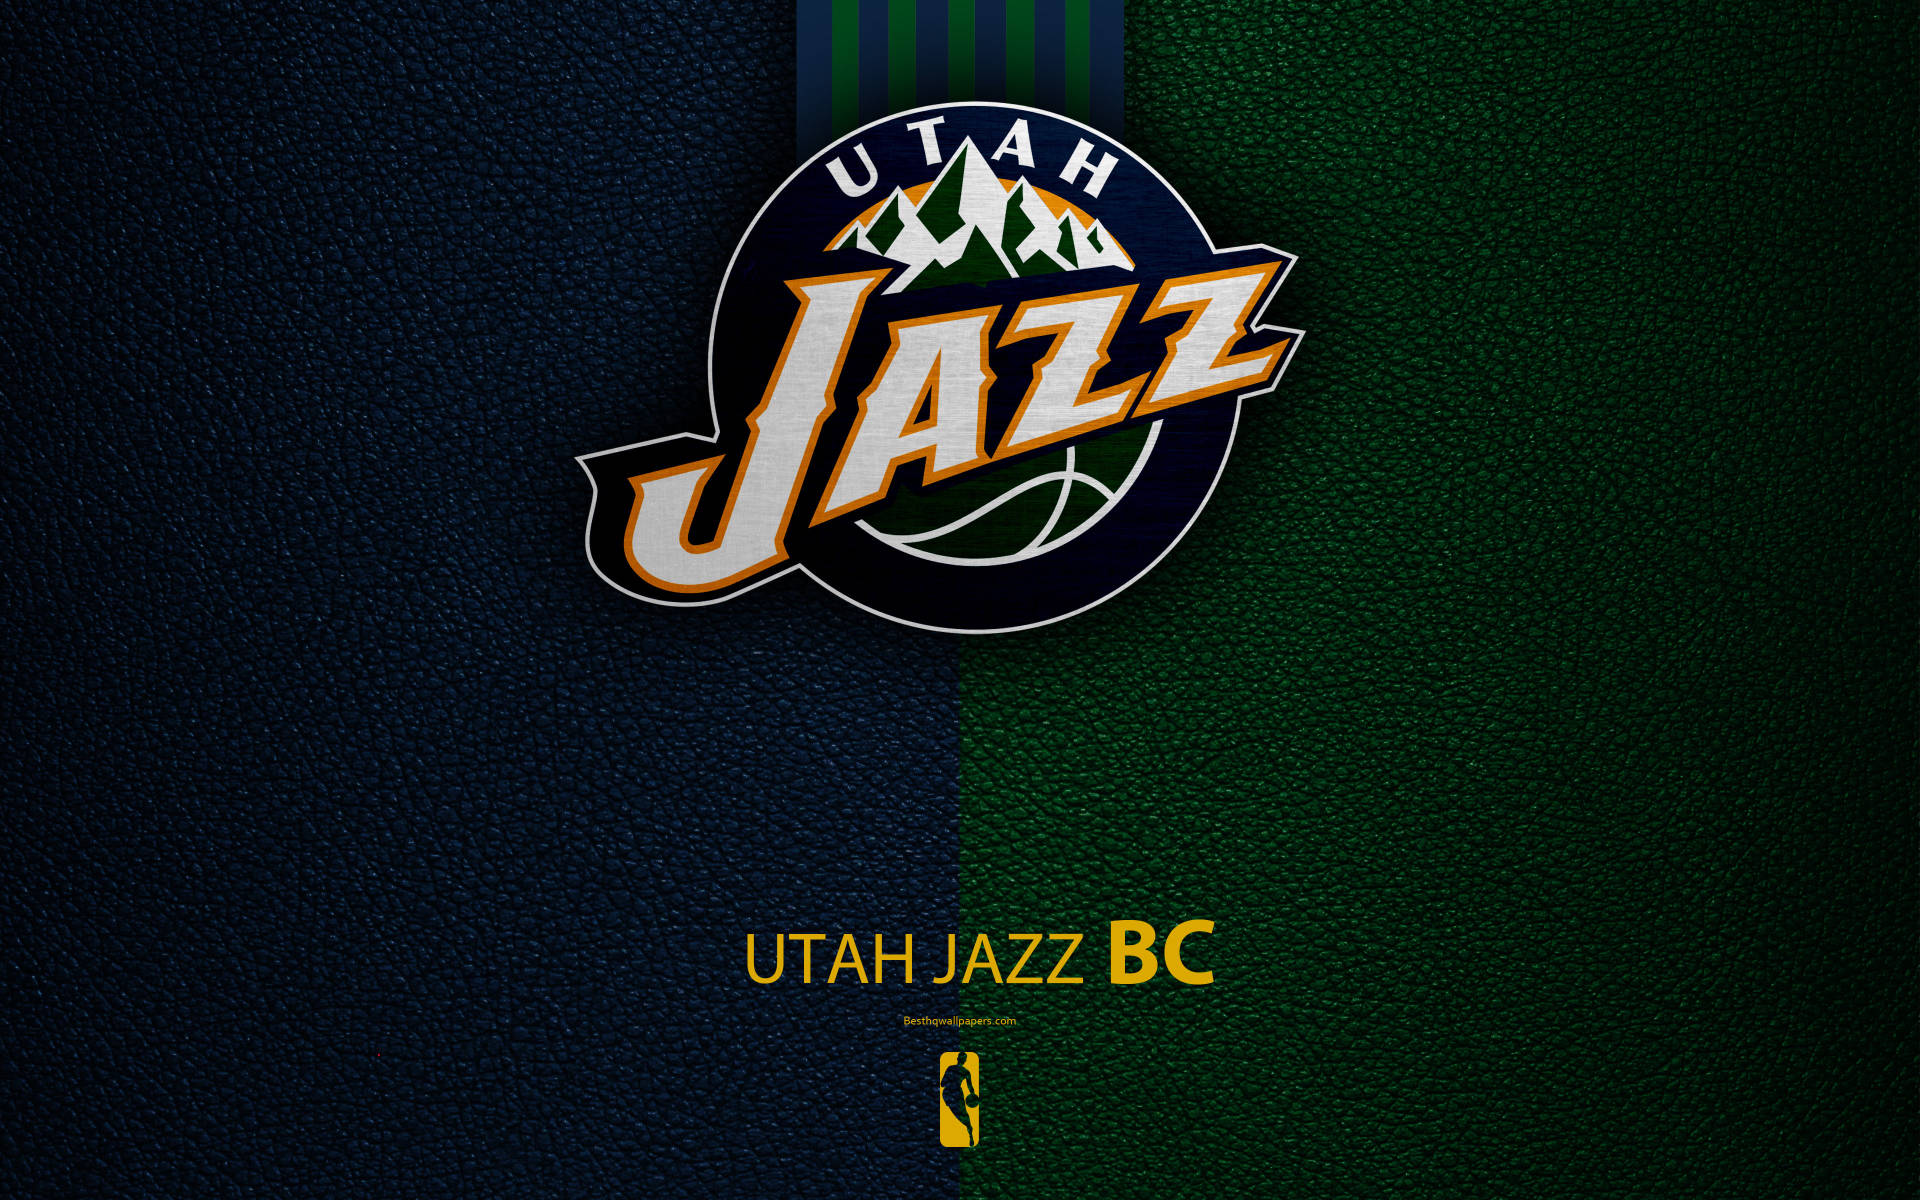 Utah Jazz In Blue And Green Background